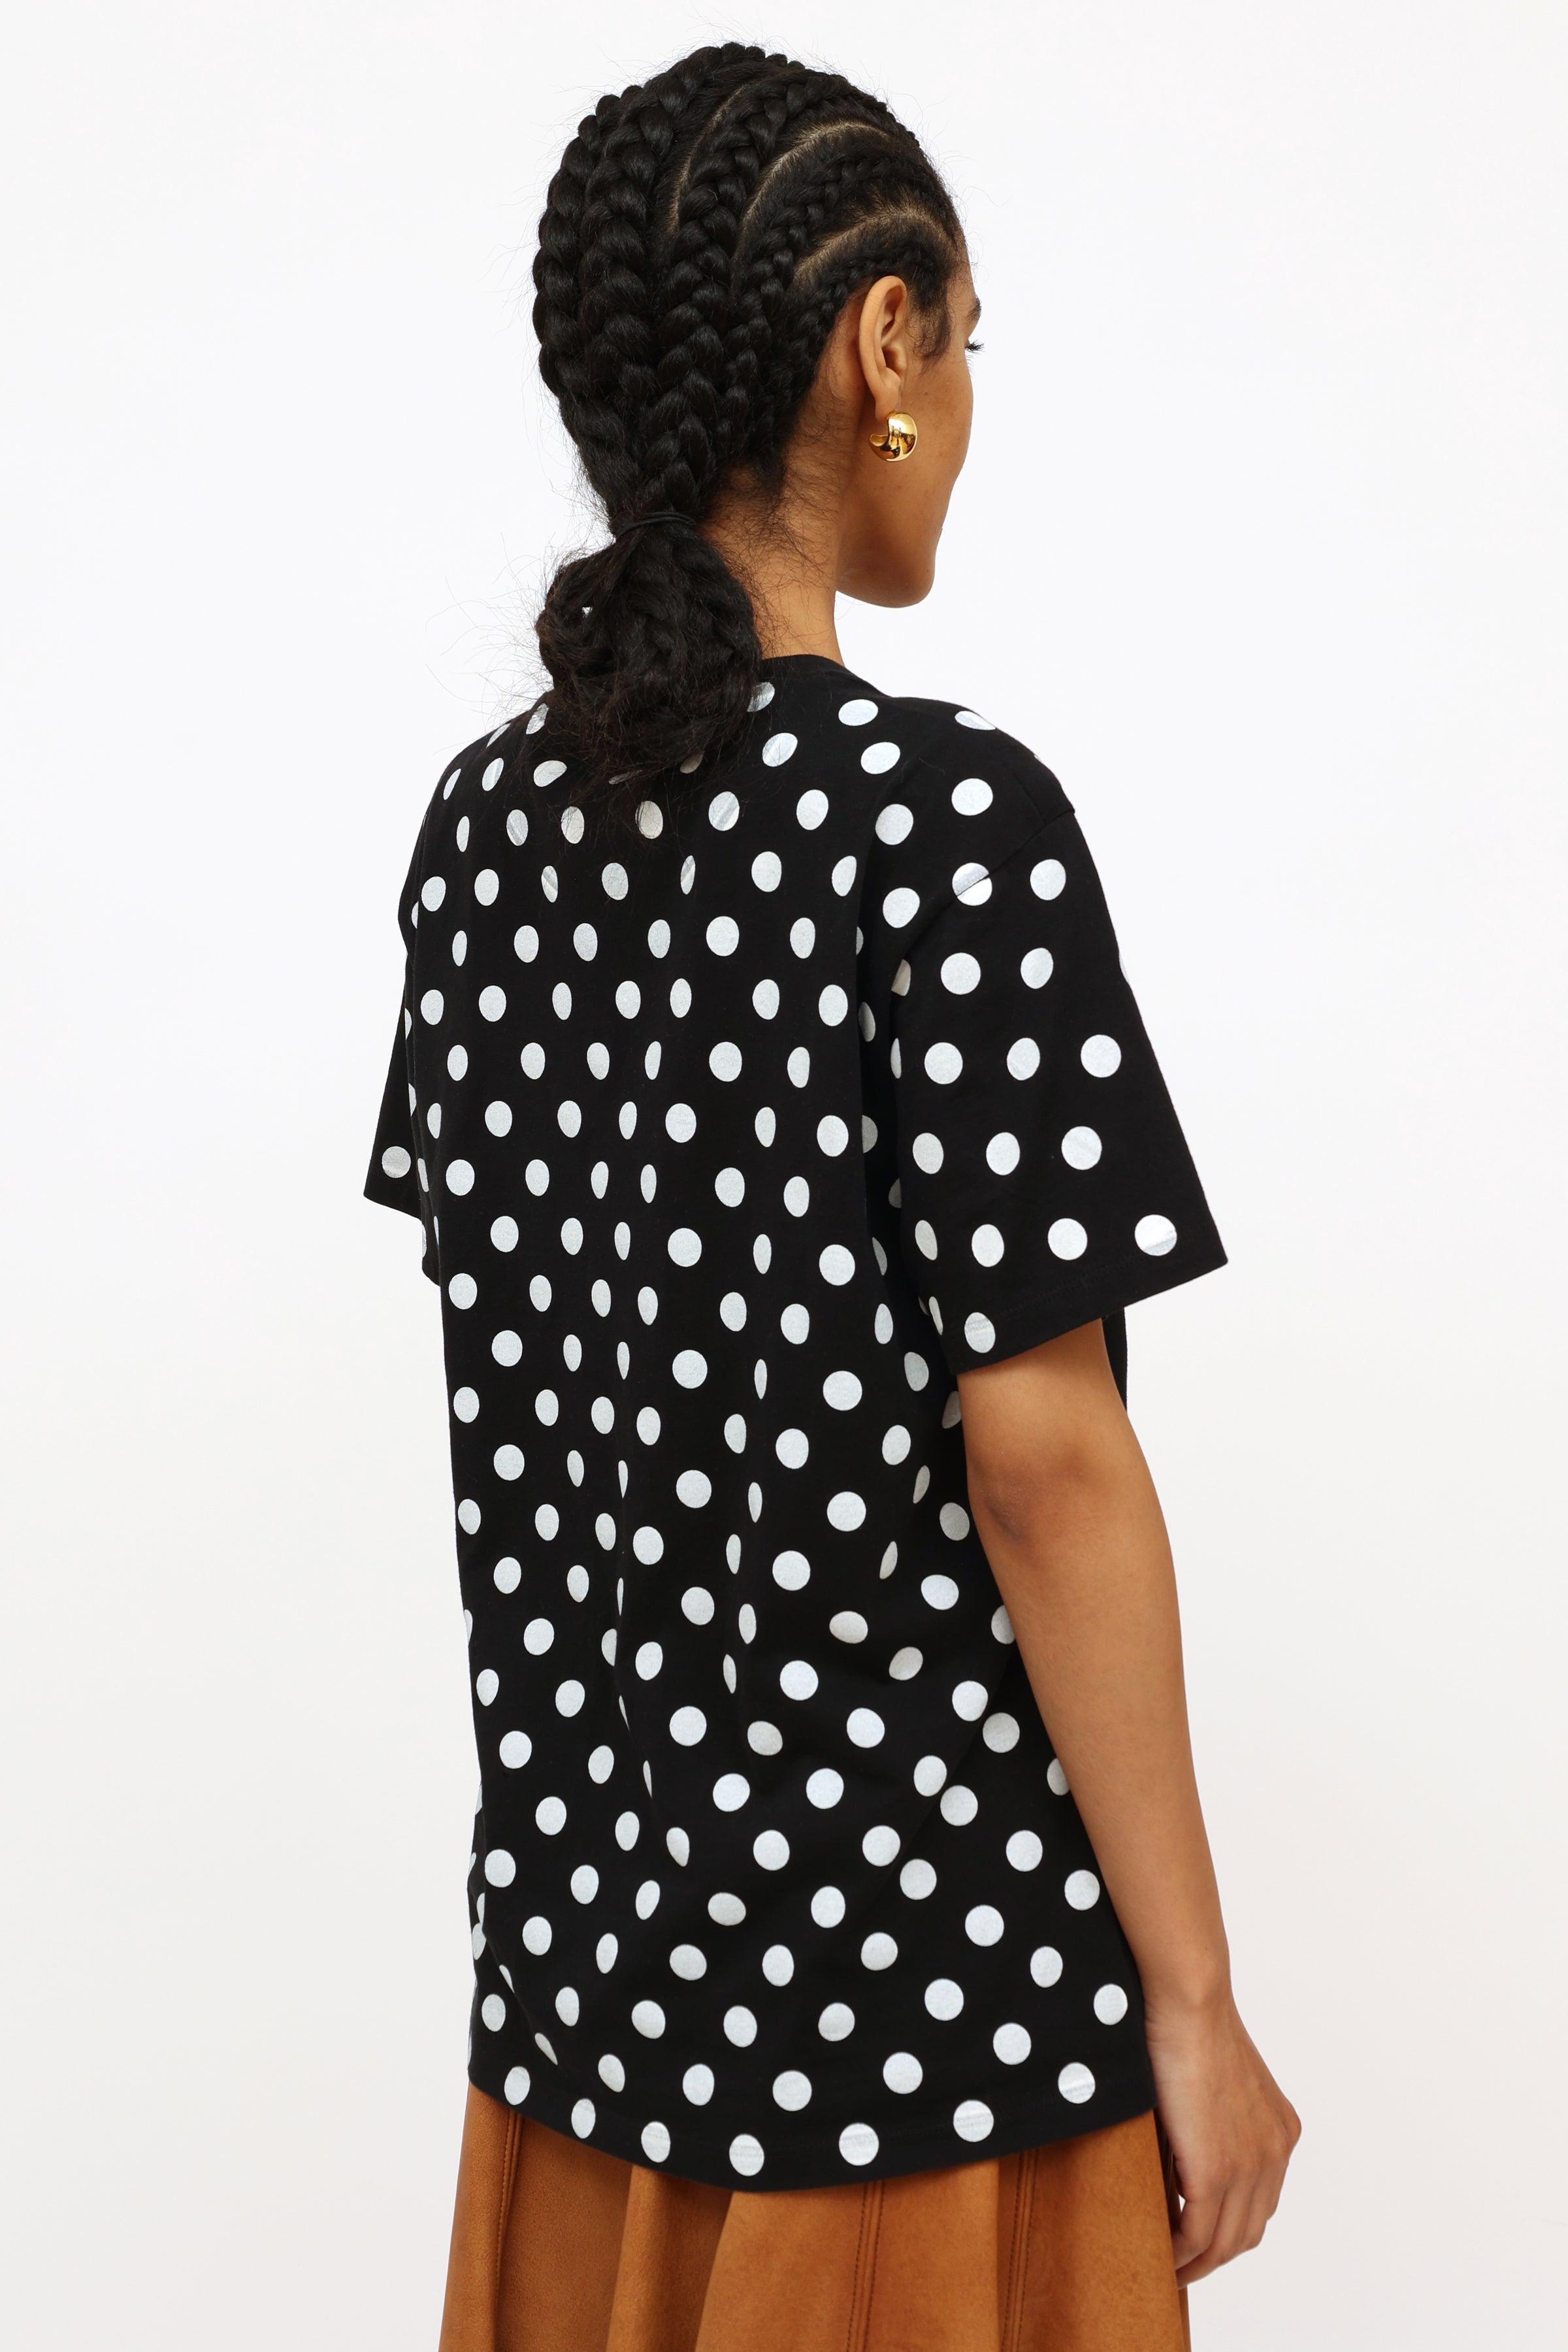 Chic Plus Size Black and White Polka Dot Outfit with the Gucci